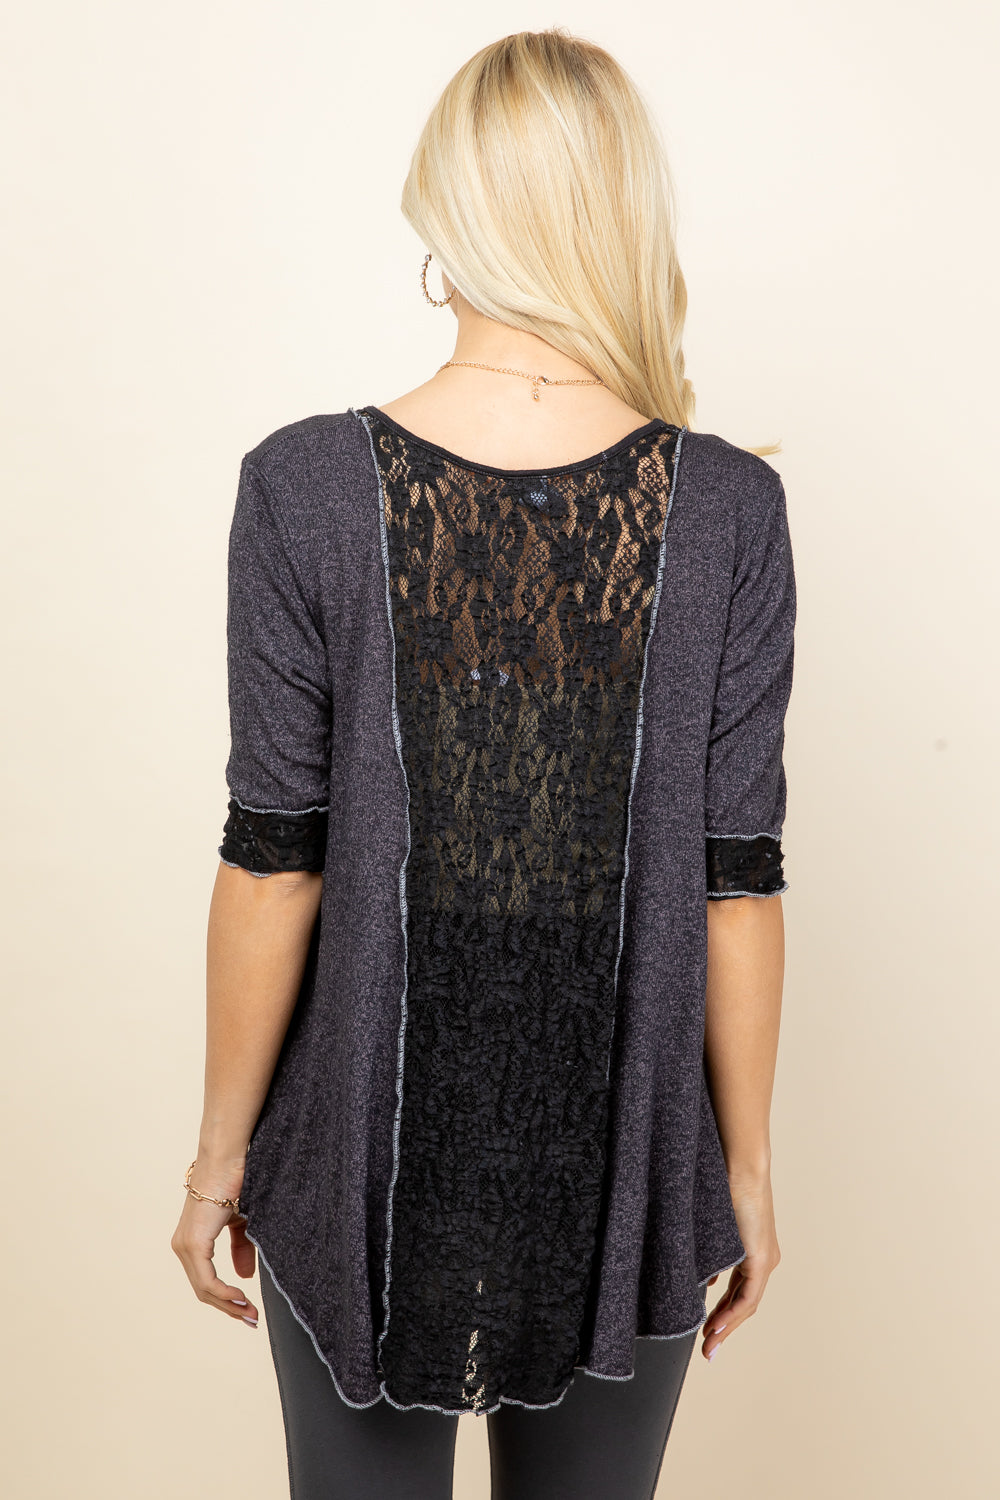 Lace Trim Tunic Top - Charcoal Speck